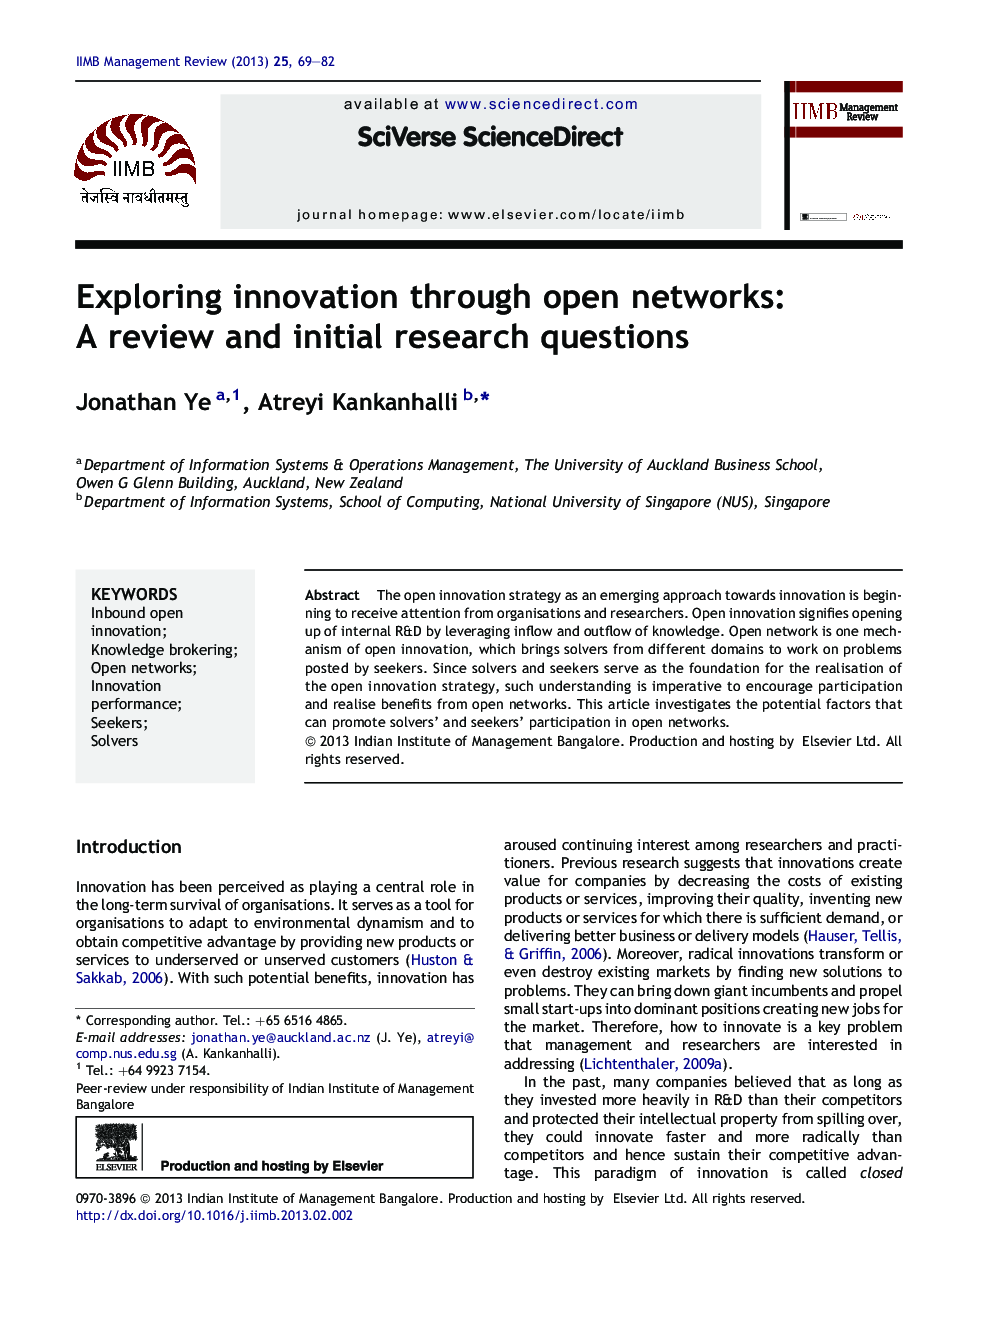 Exploring innovation through open networks: A review and initial research questions 